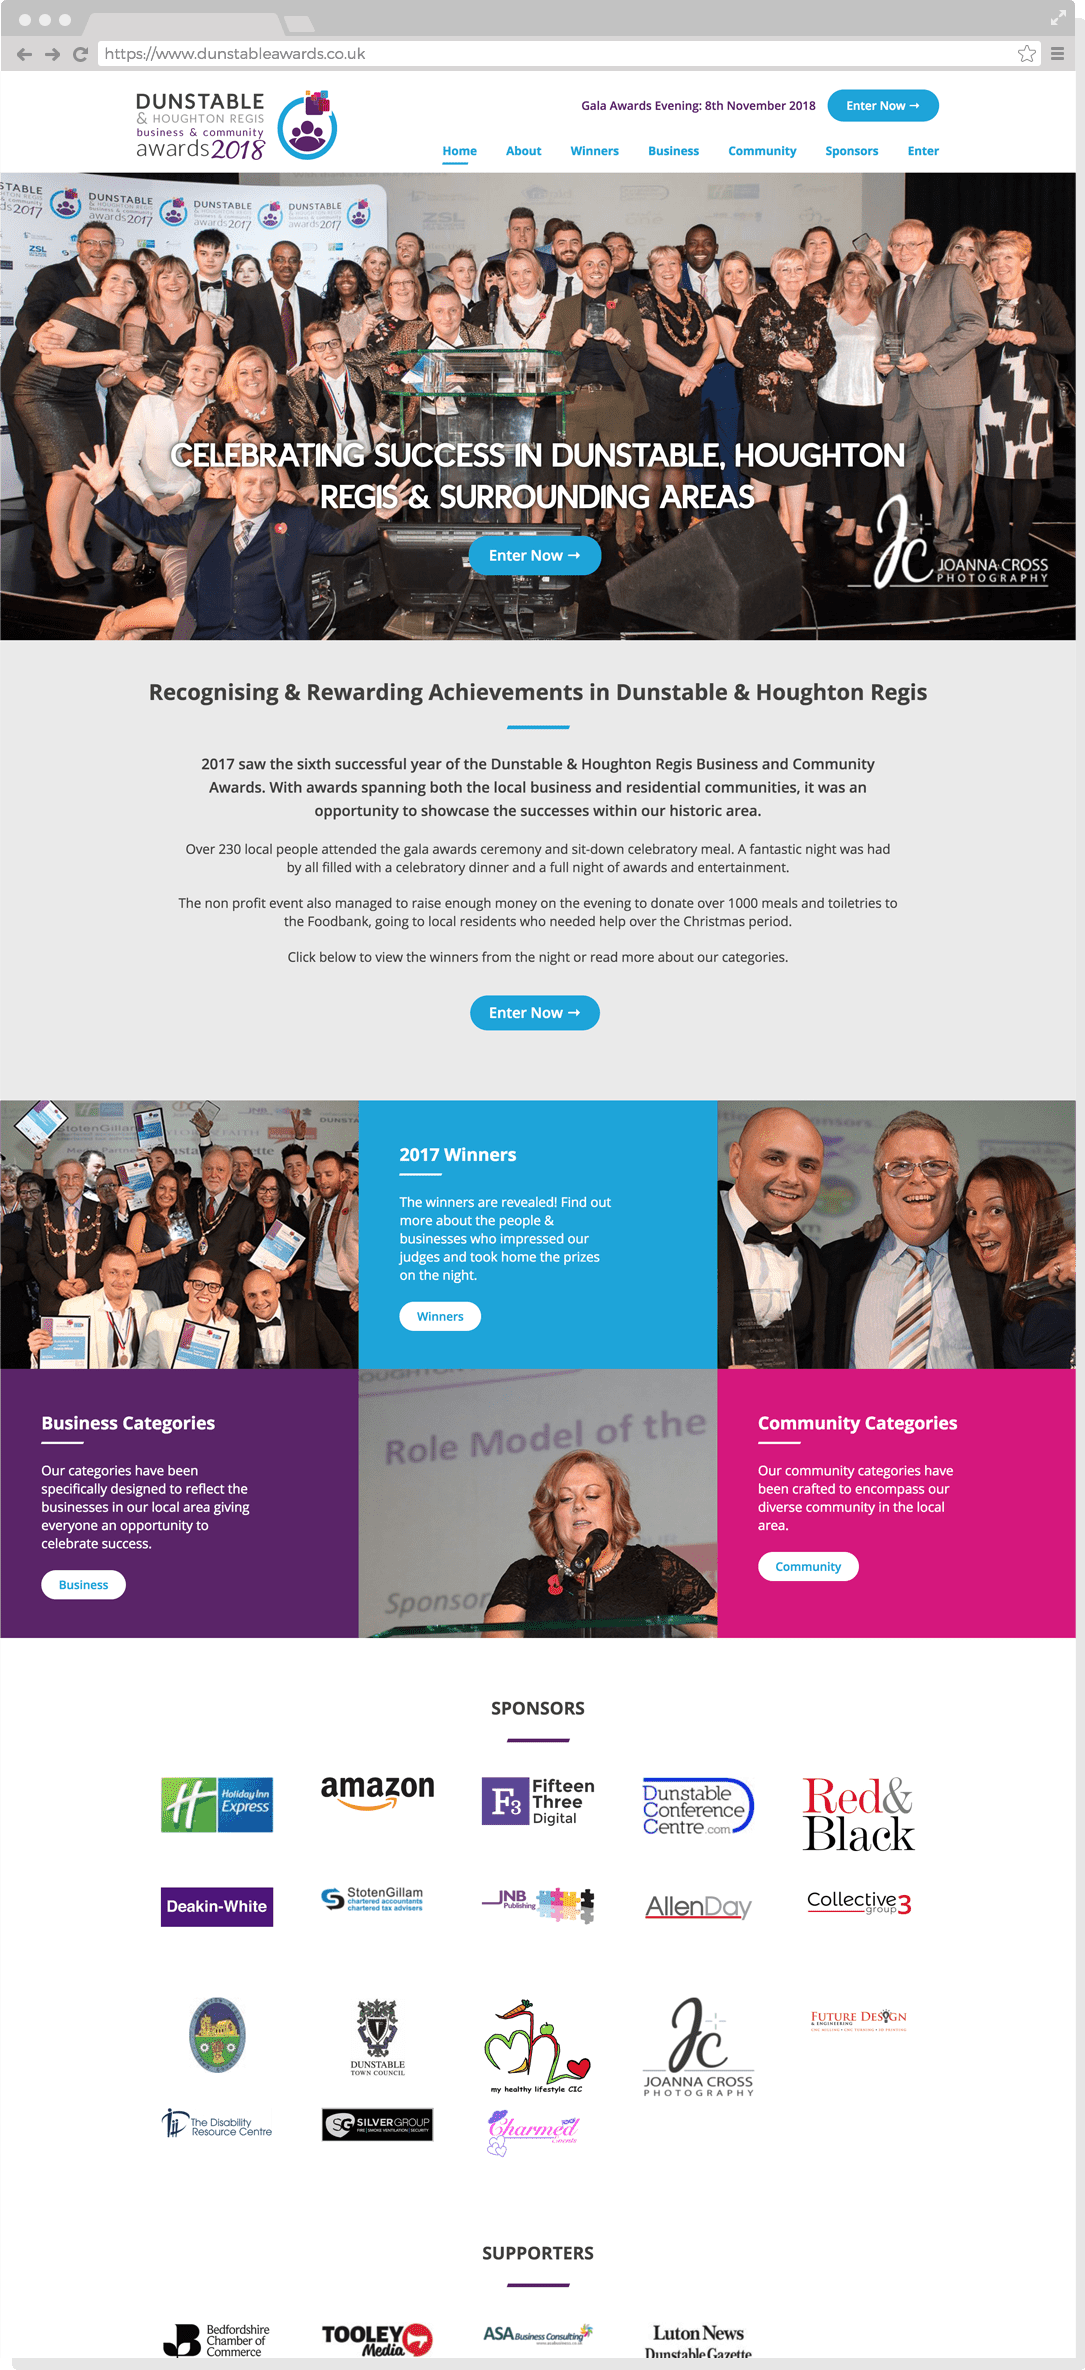 Home page of The Dunstable & Houghton Regis Business & Community Awards Website